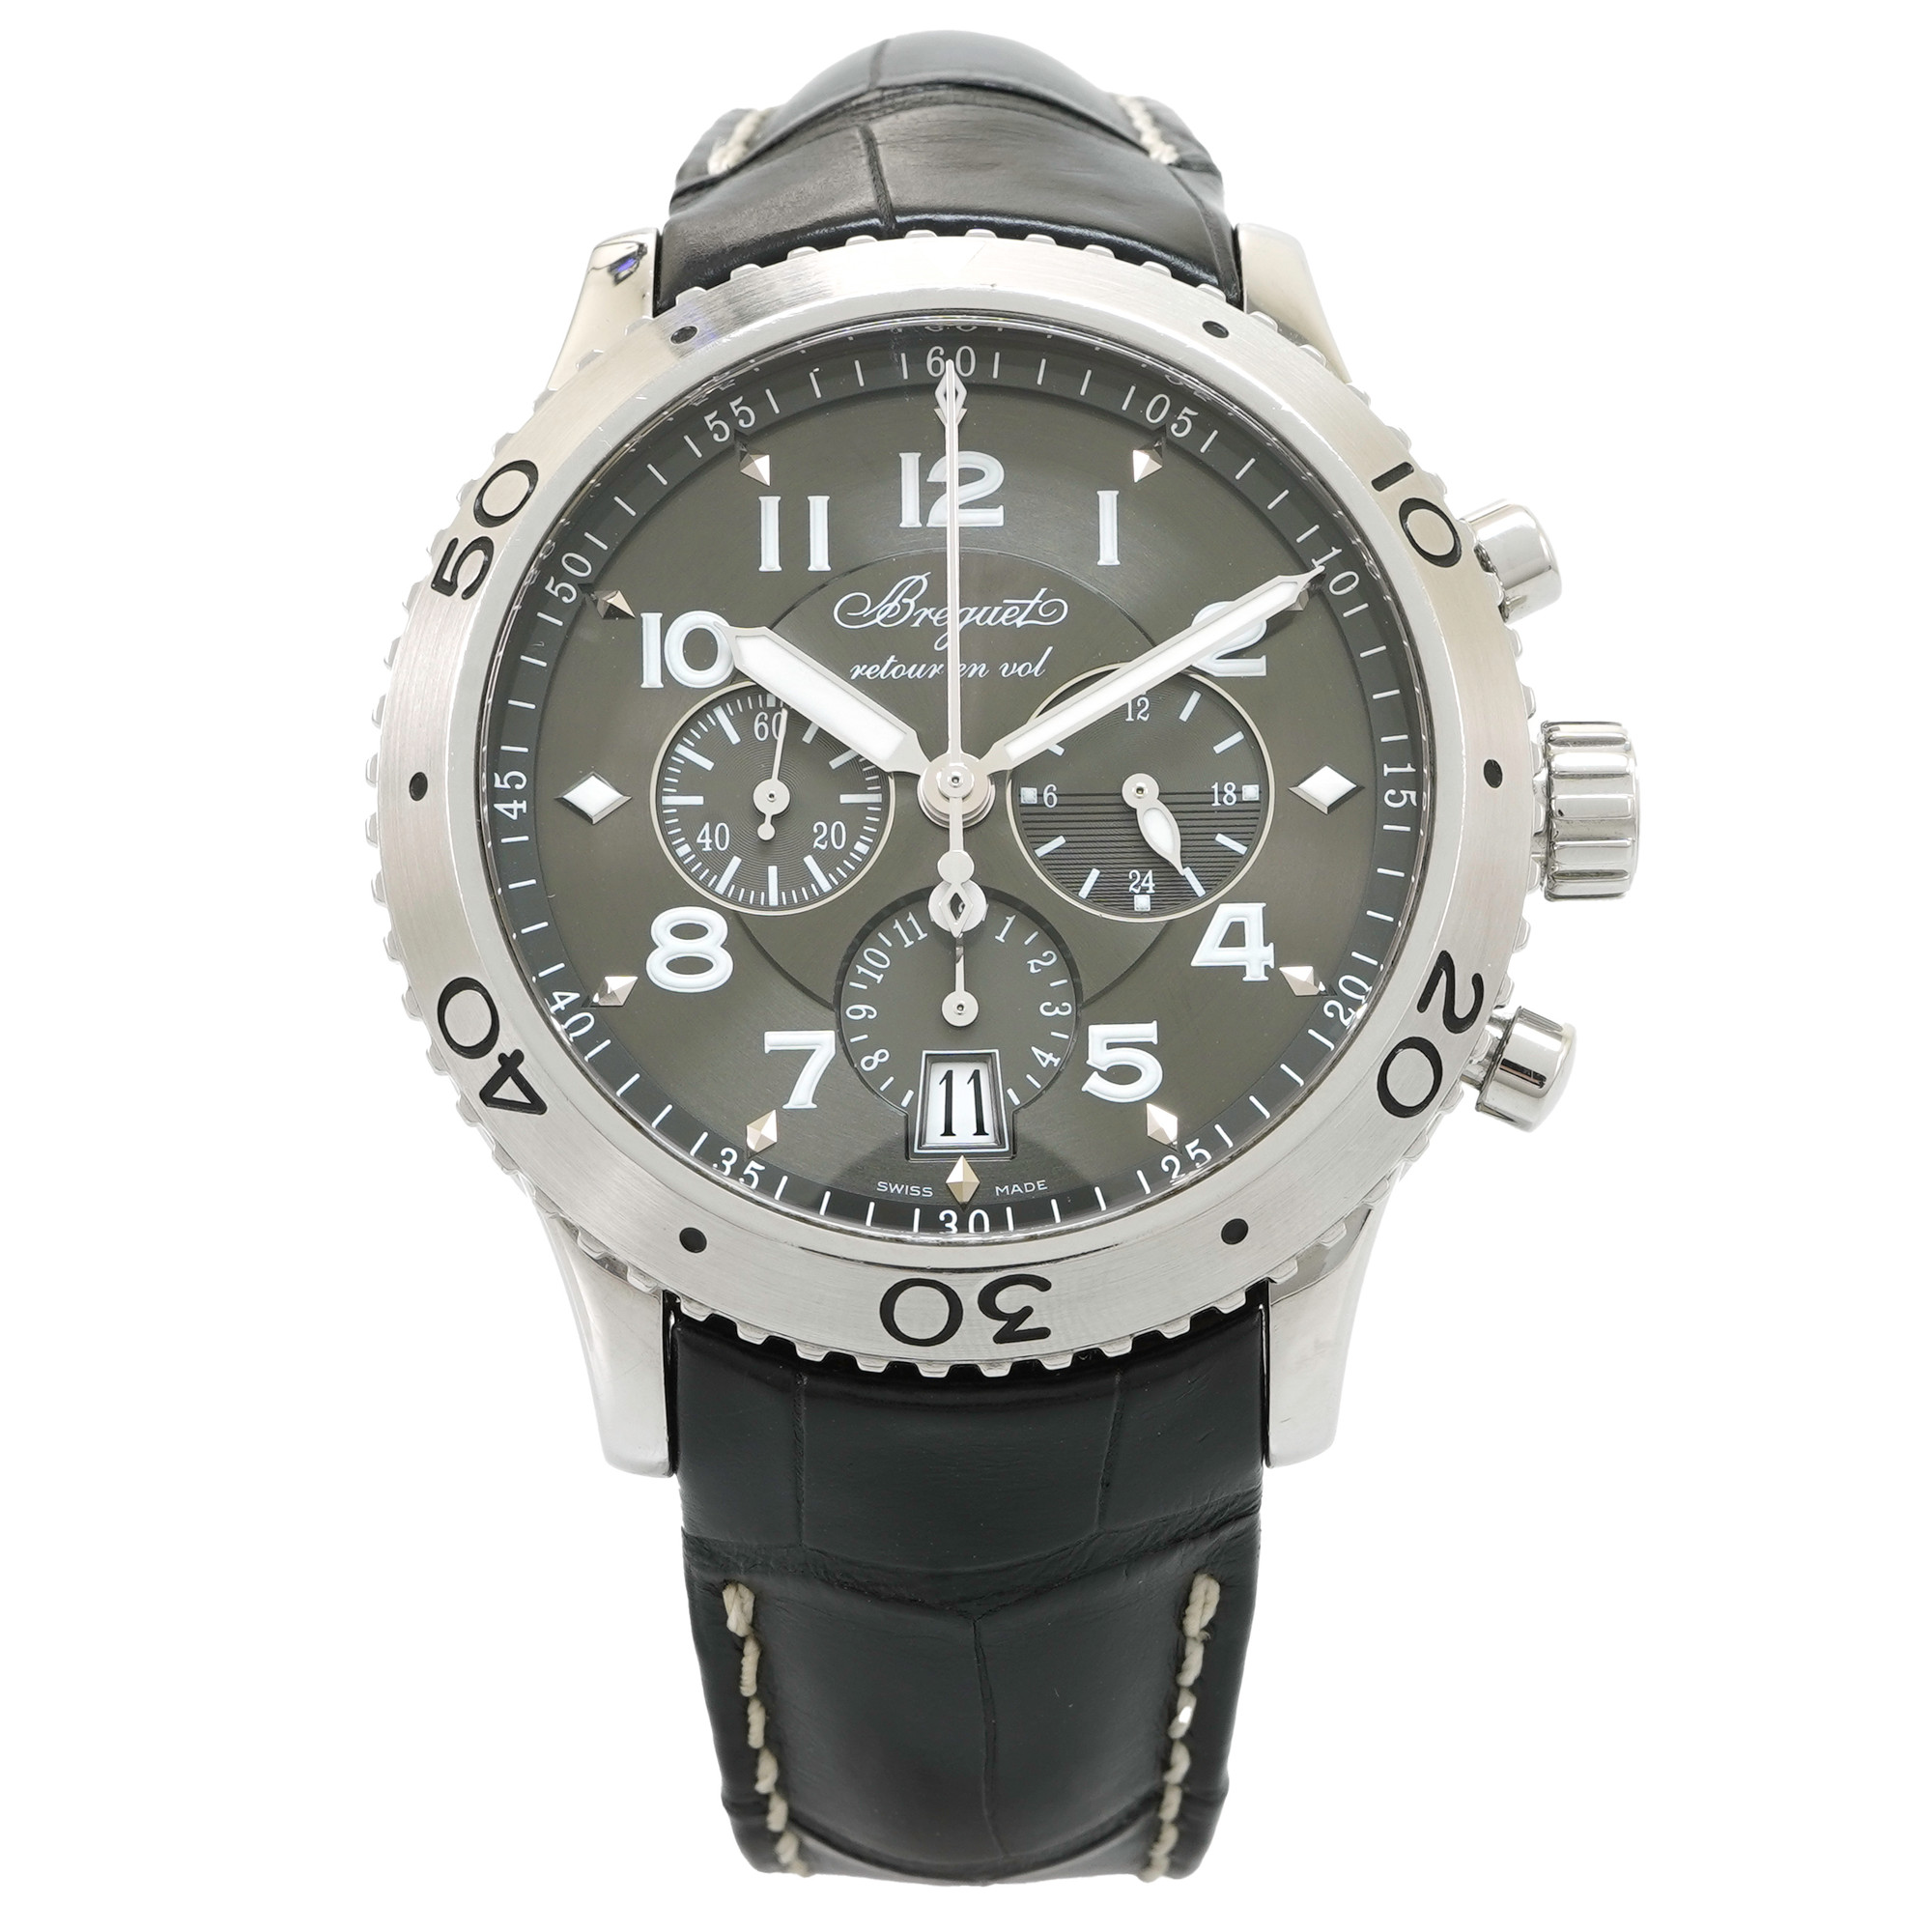 Breguet Type XXI Flyback 3810 Chronograph - Inventory 5573